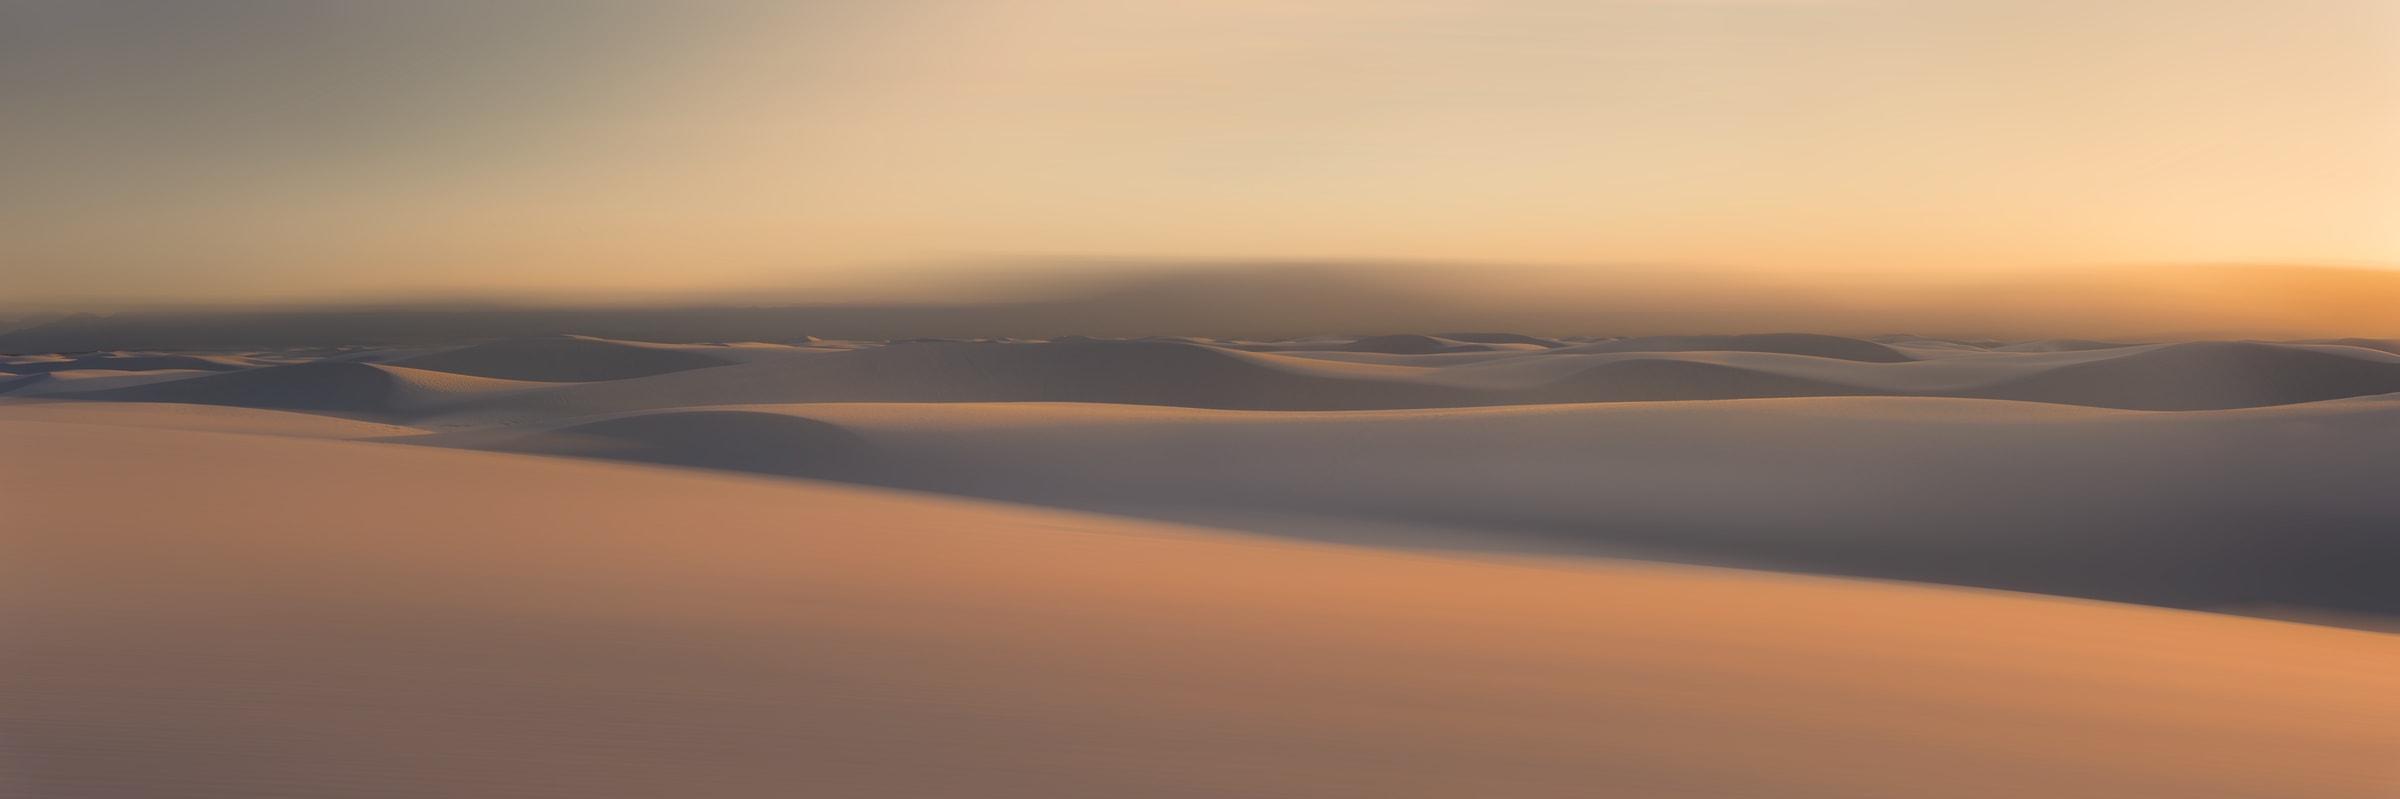 300 megapixels! A very high resolution, artistic VAST photo print of sand dunes; panorama photograph created by Francesco Emanuele Carucci in White Sands, National Park, New Mexico.